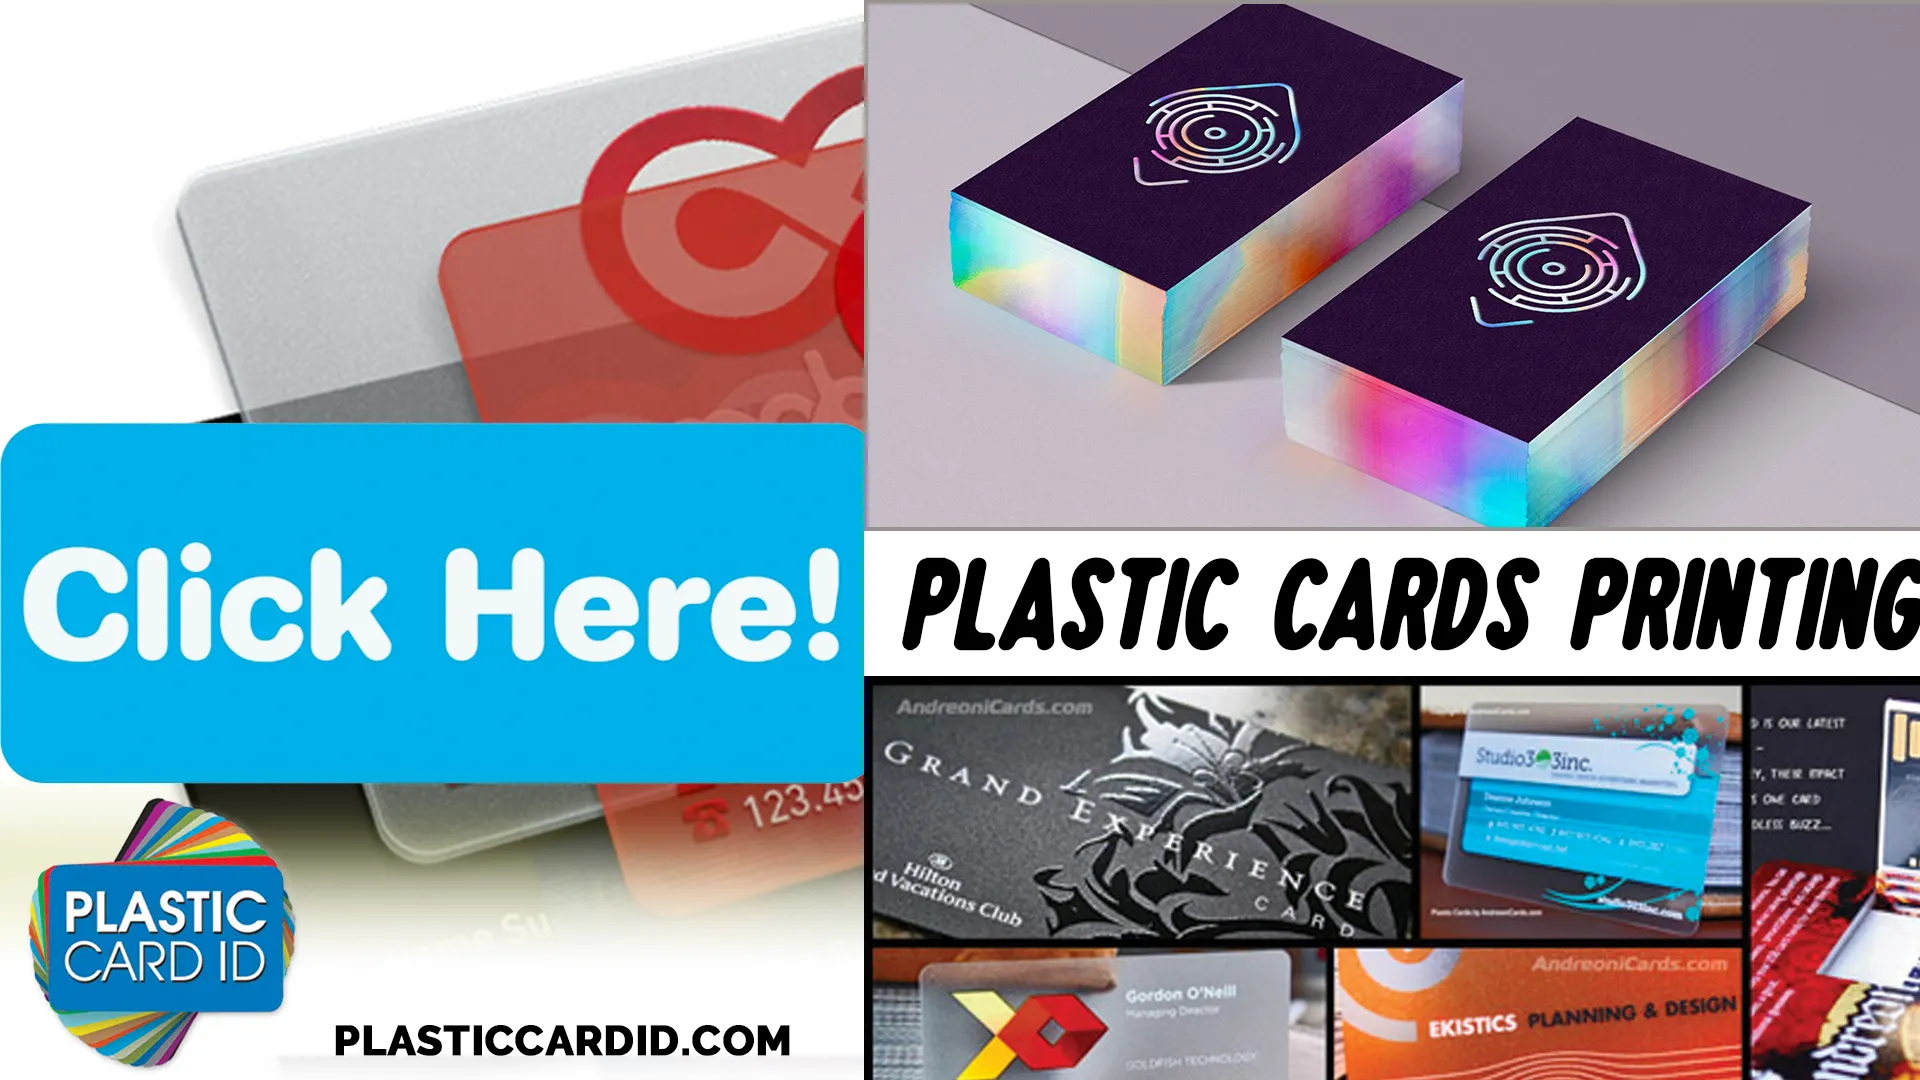 Optimizing Your Print Environment with Plastic Card ID
